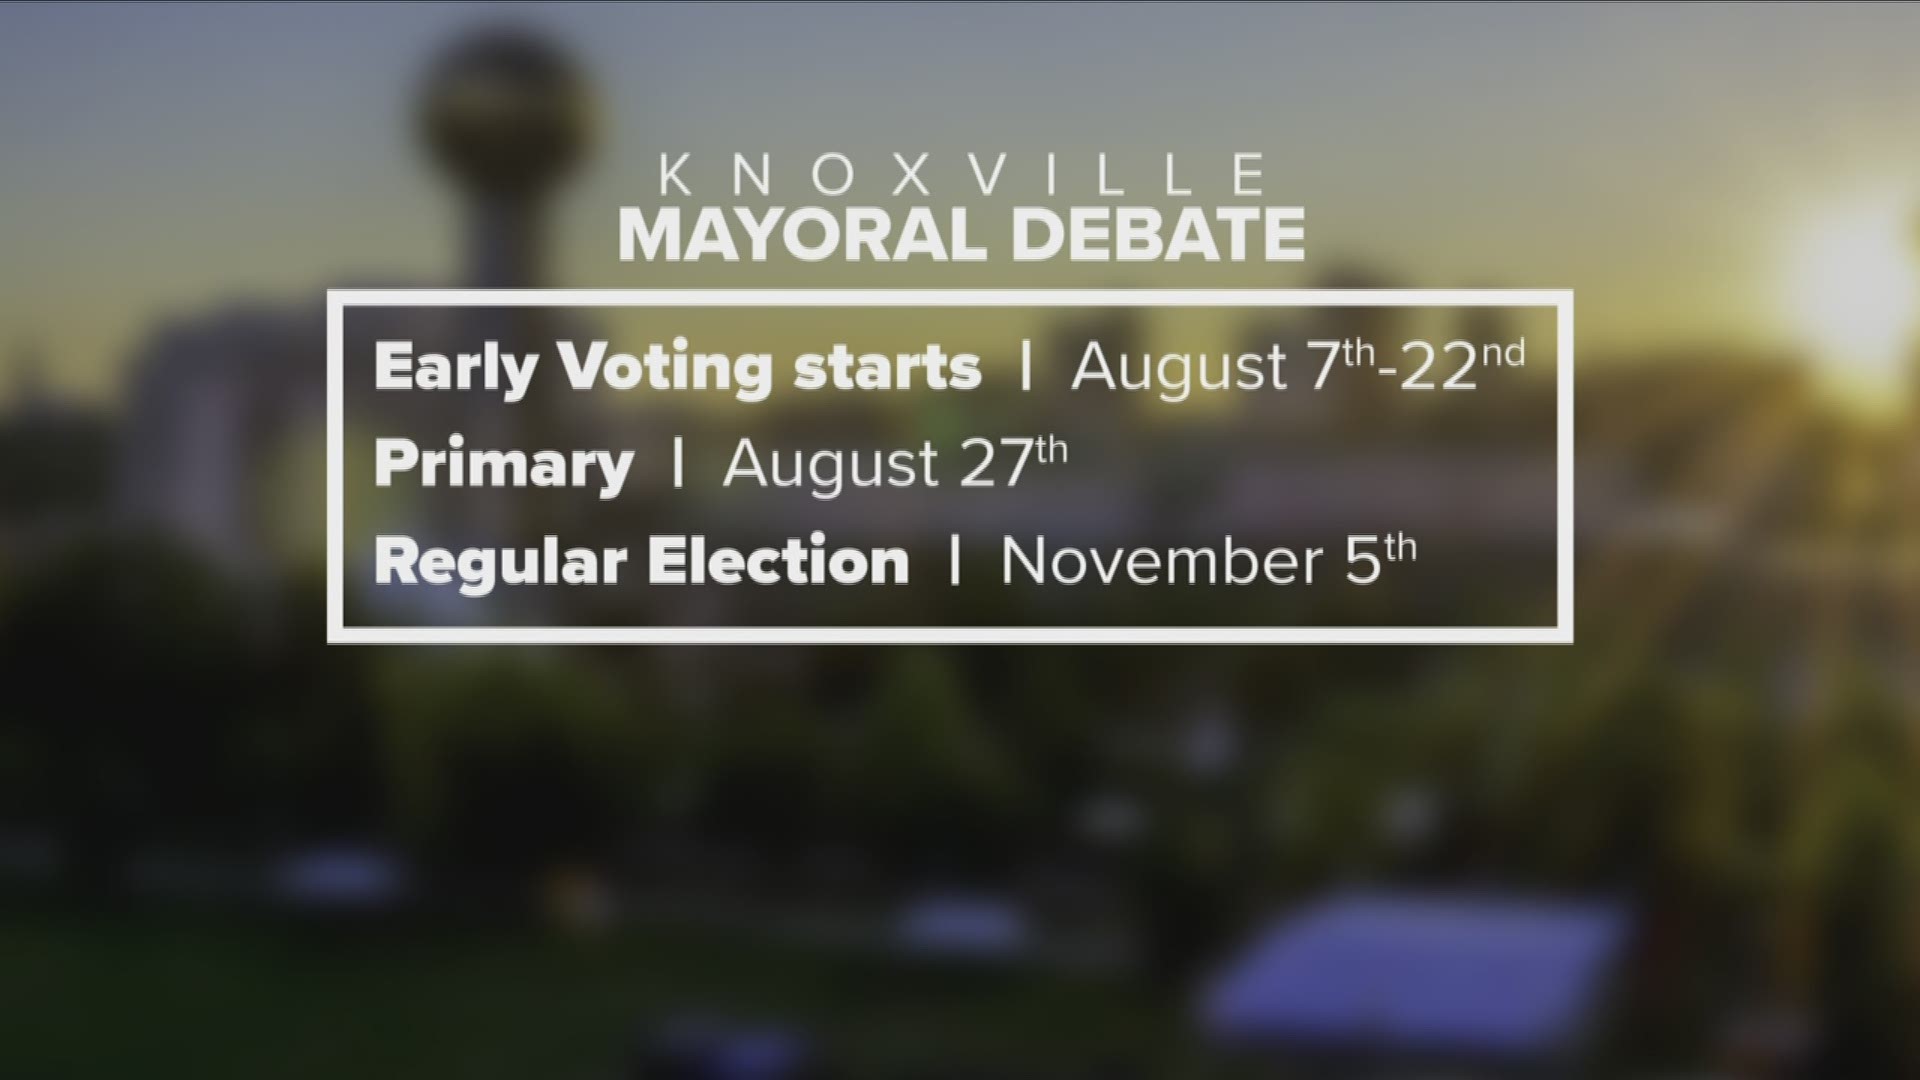 Knoxville's Mayoral Debate aired live on WBIR, on wbir.com, and WBIR Channel 10's Facebook page on Tuesday, August 6, 2019.